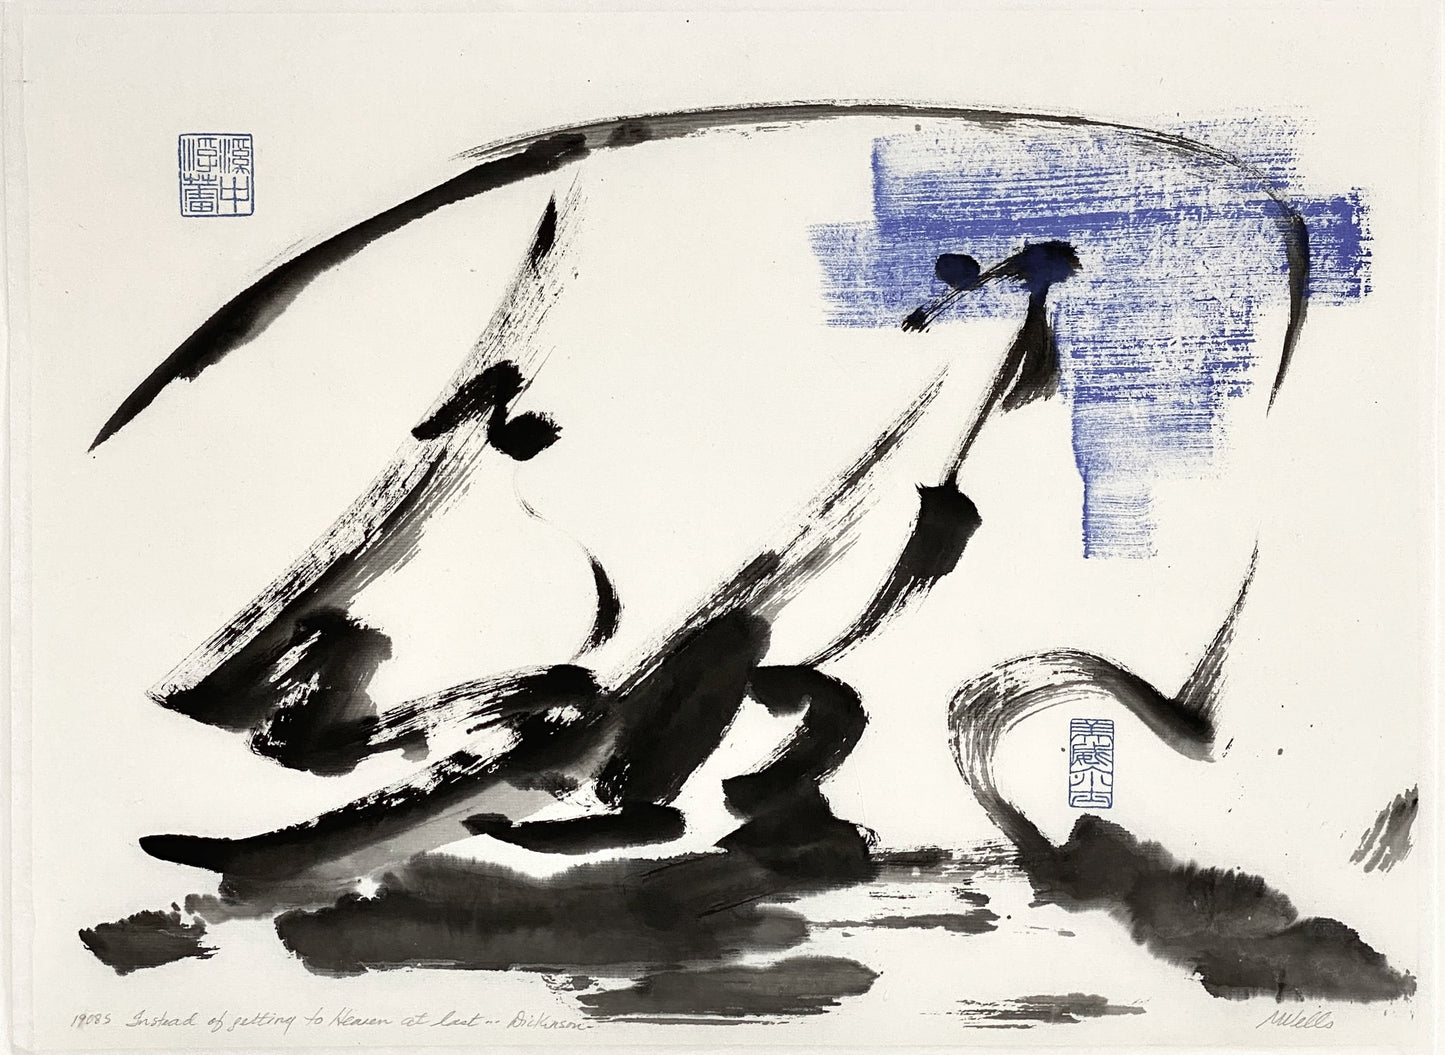 Abstract sumi e Original by Marilyn Wells based on poem by Emily Dickinson. Ink on Paper